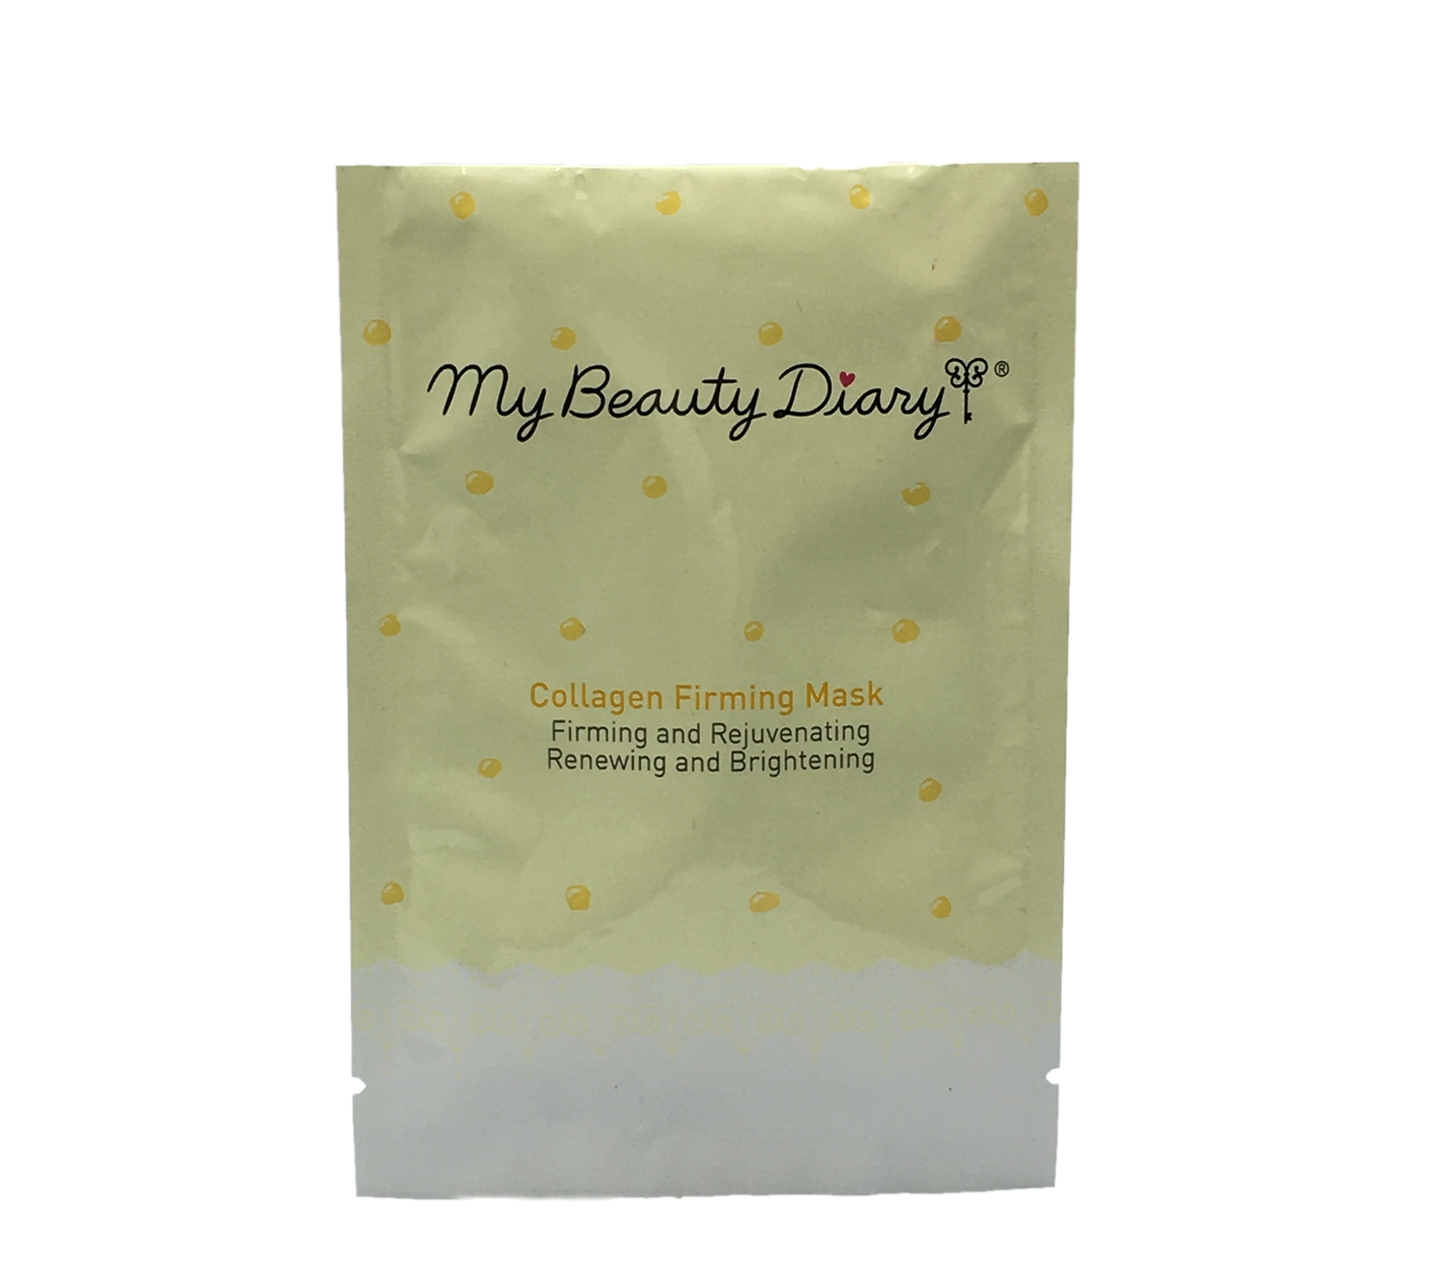 My Beauty Diary Collagen Firming Mask Skin Care